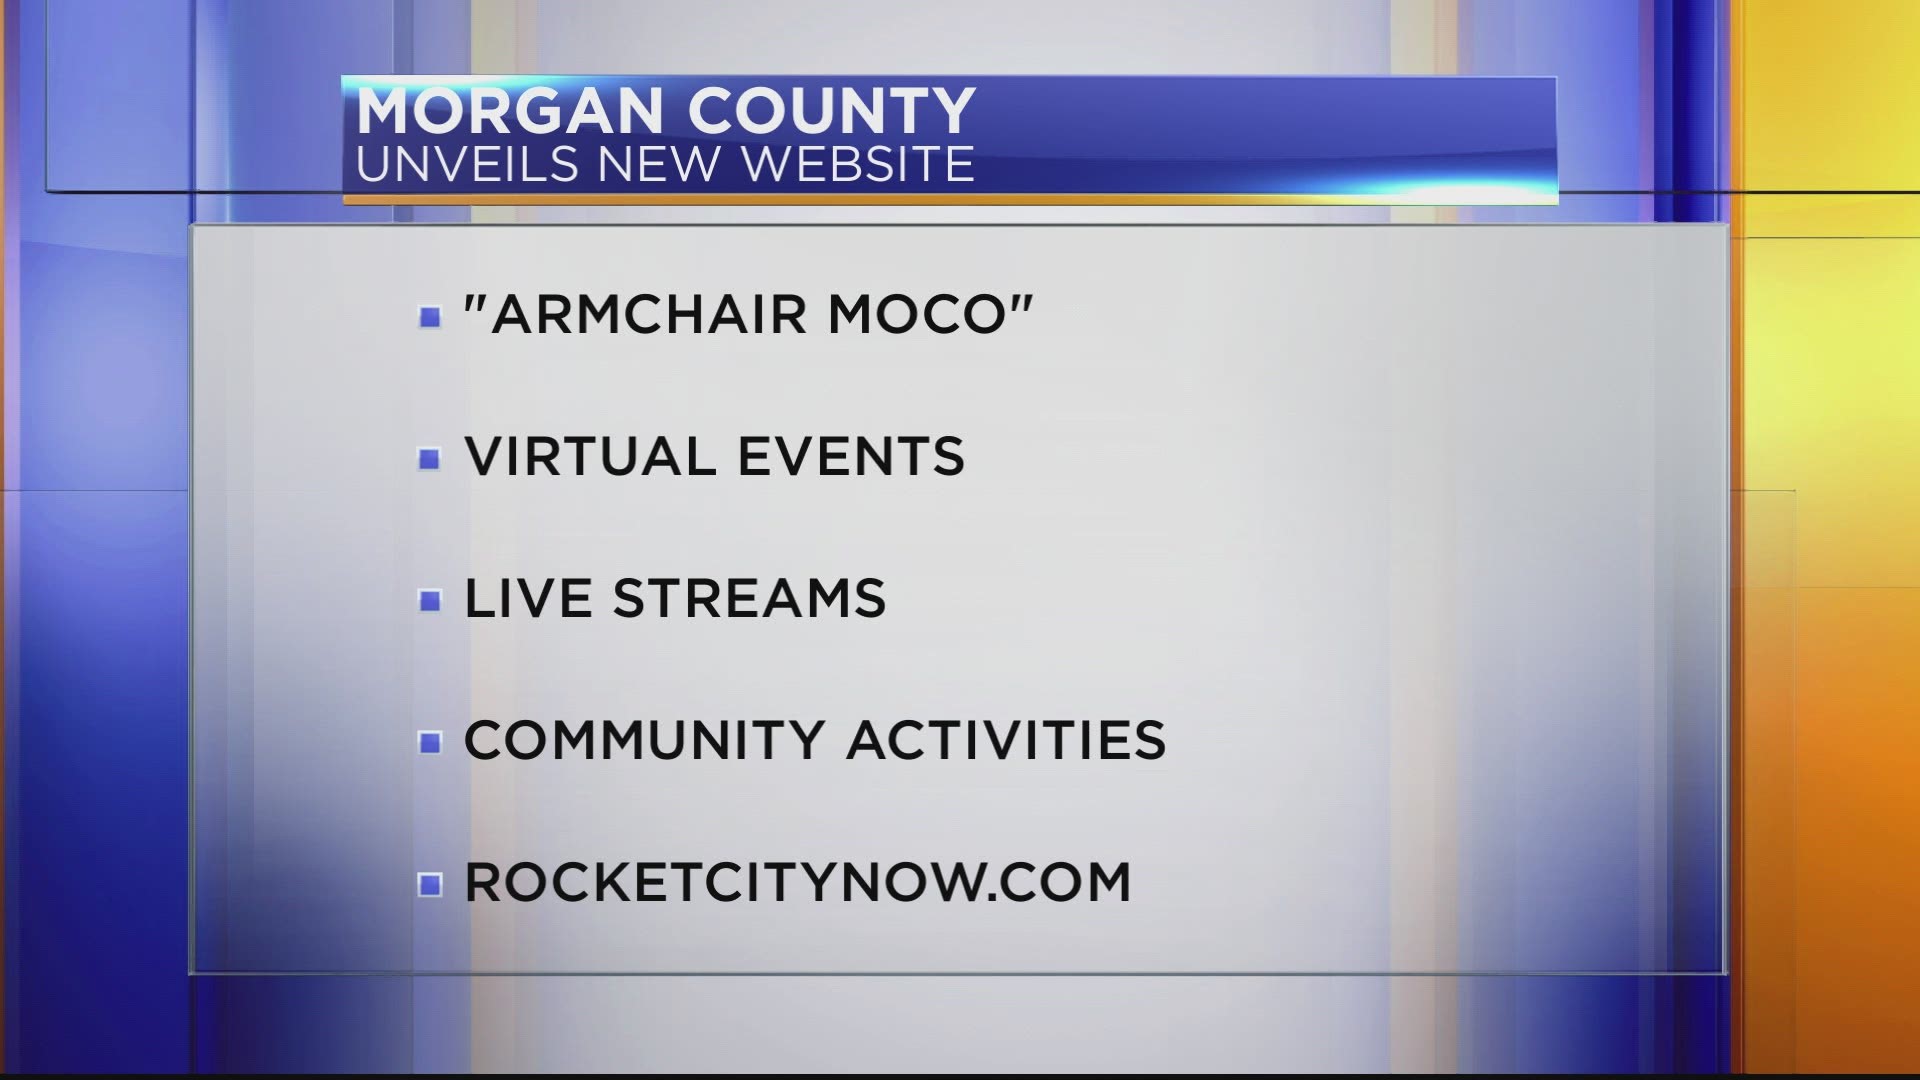 The website is a collection of fun things you can do in Morgan County while social distancing.